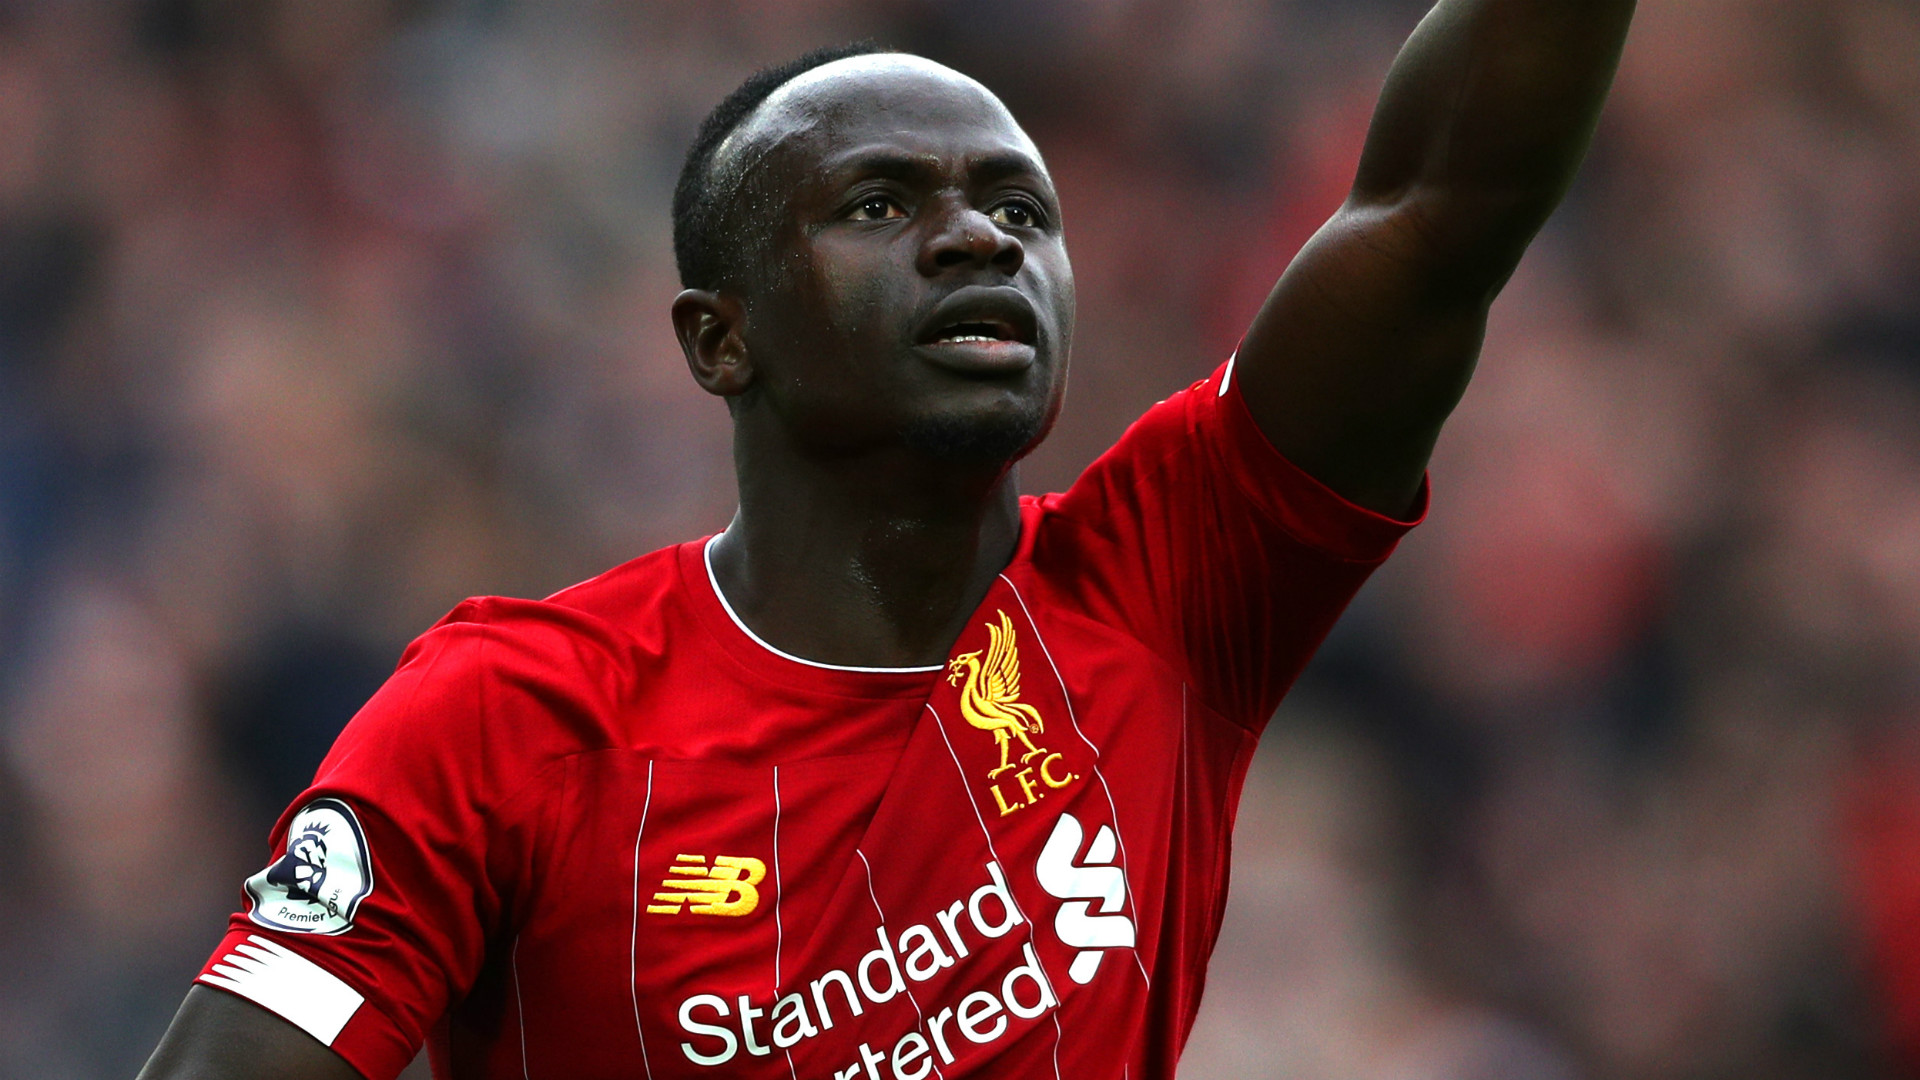 'We won't stop here!' - Mane out to achieve even 'bigger things' at Liverpool after title triumph